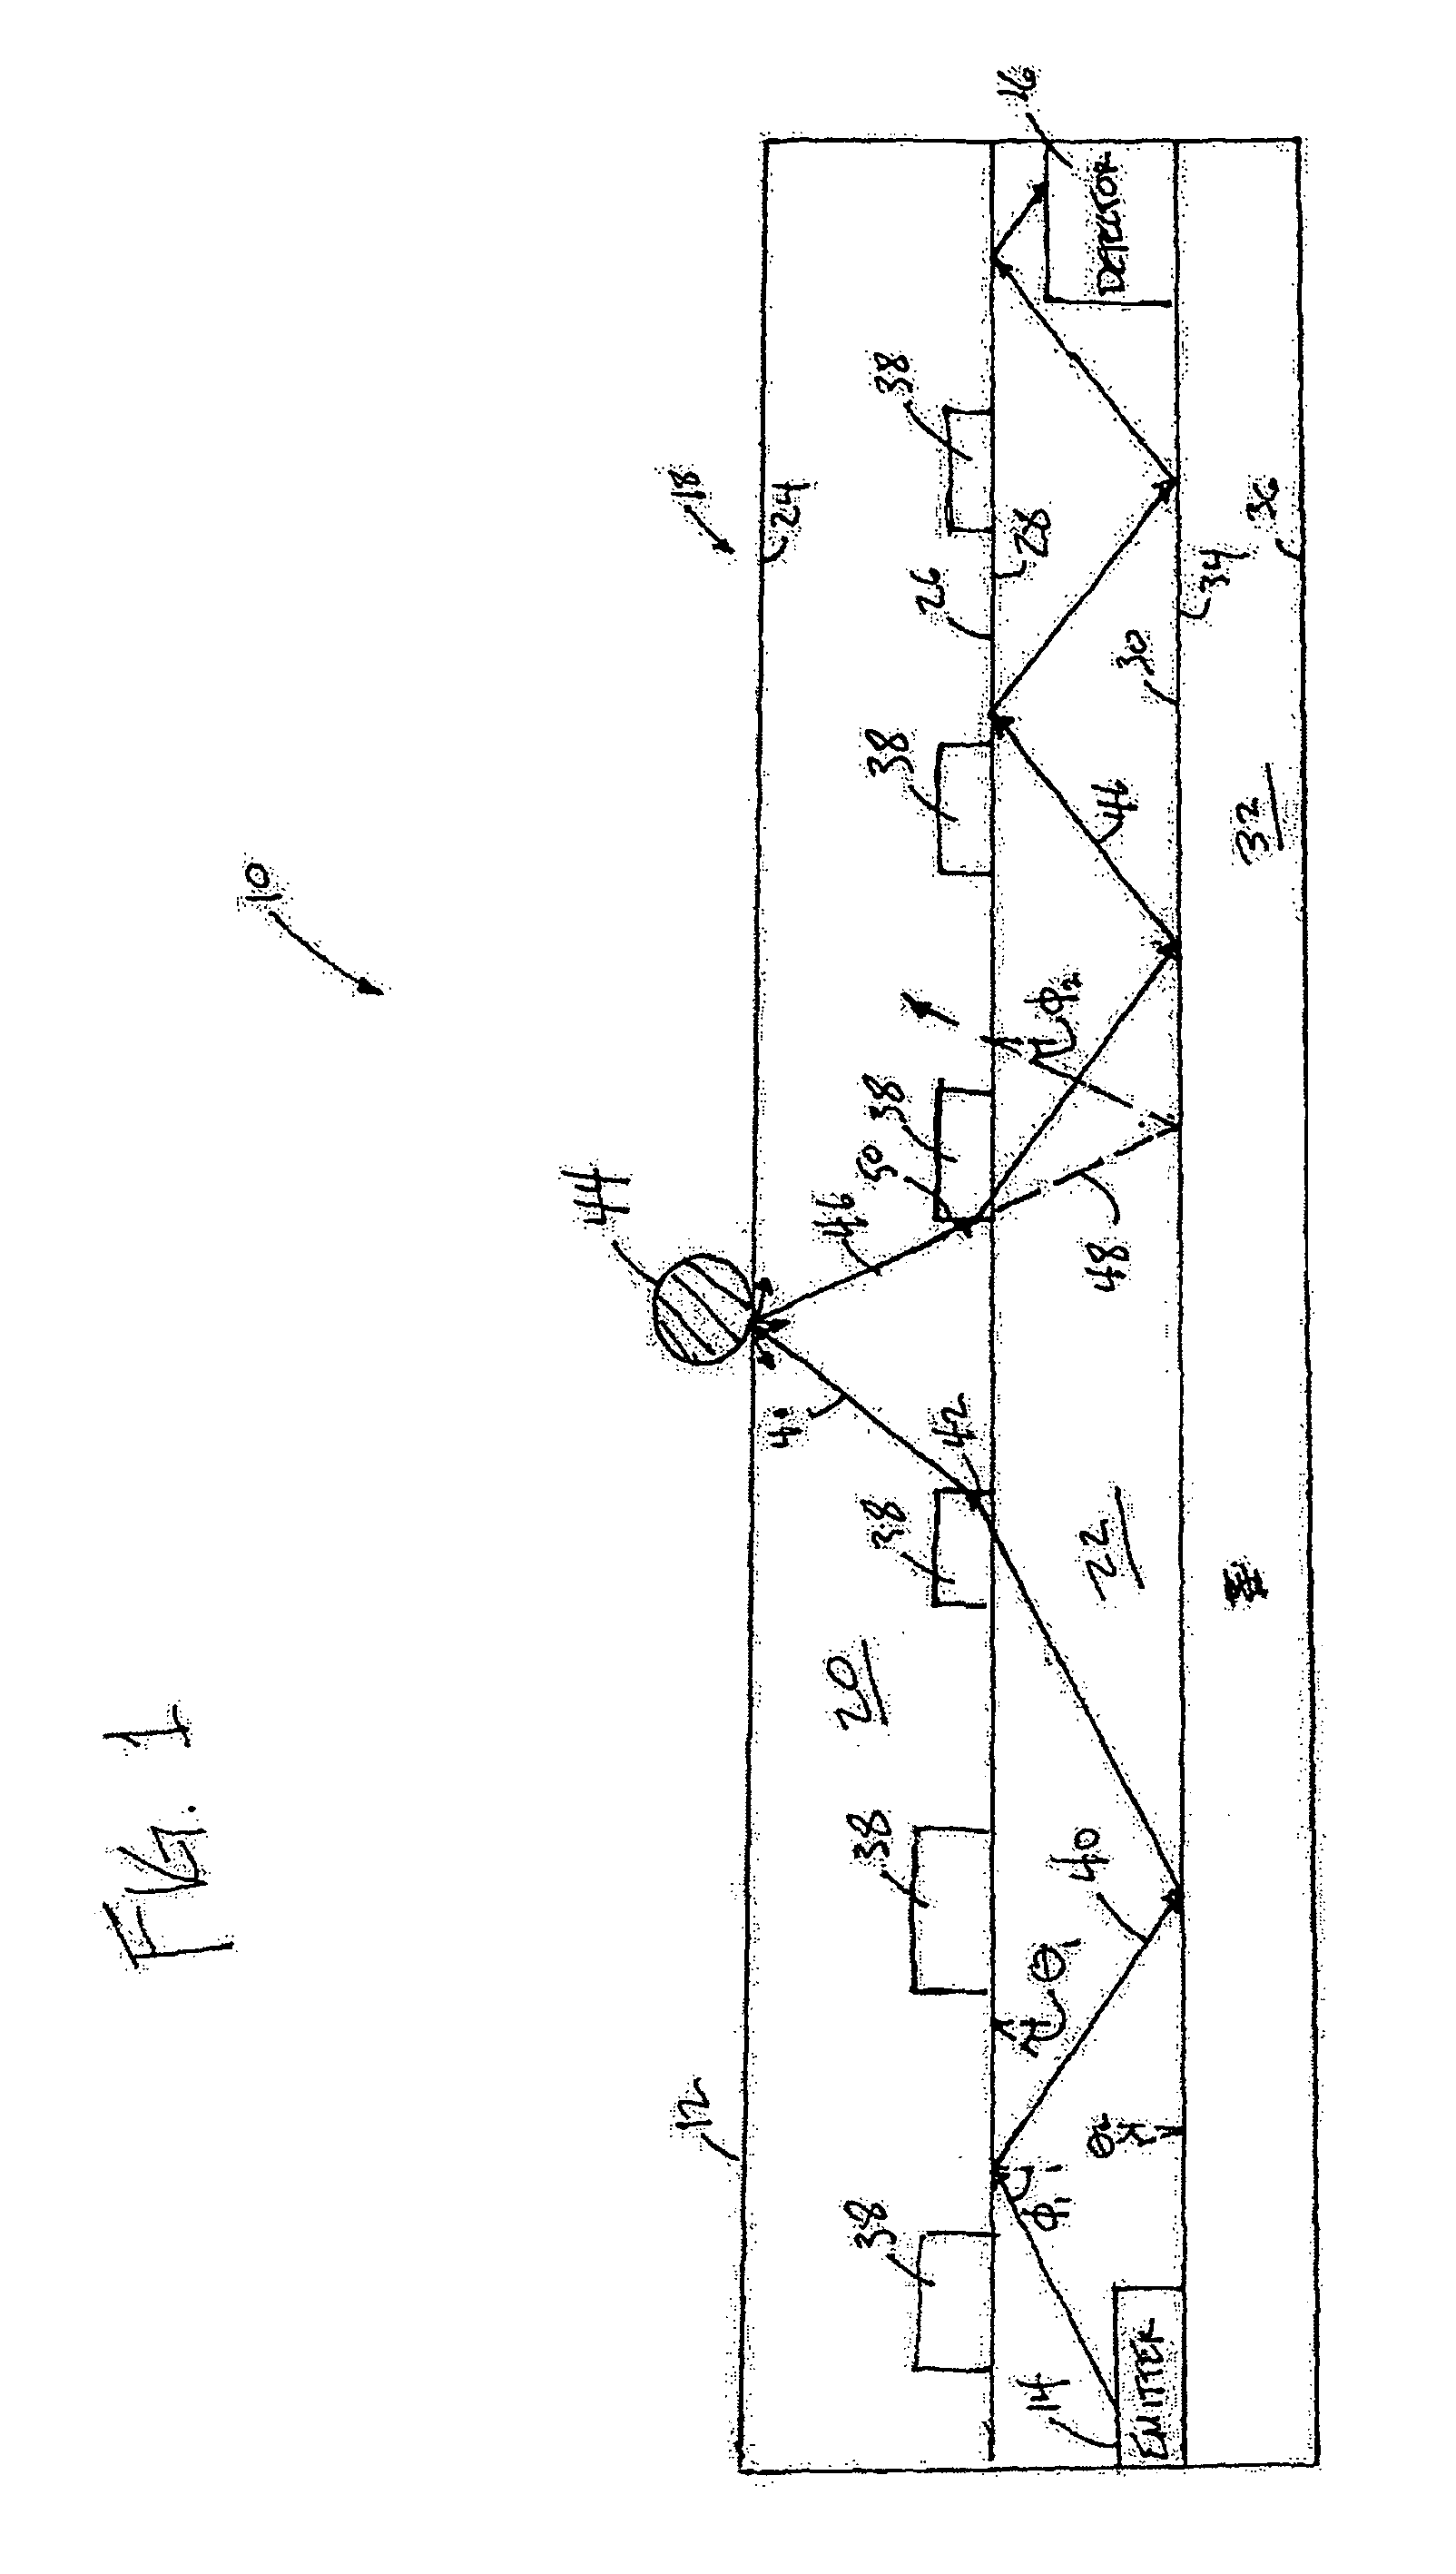 Optical touchpad with three-dimensional position determination